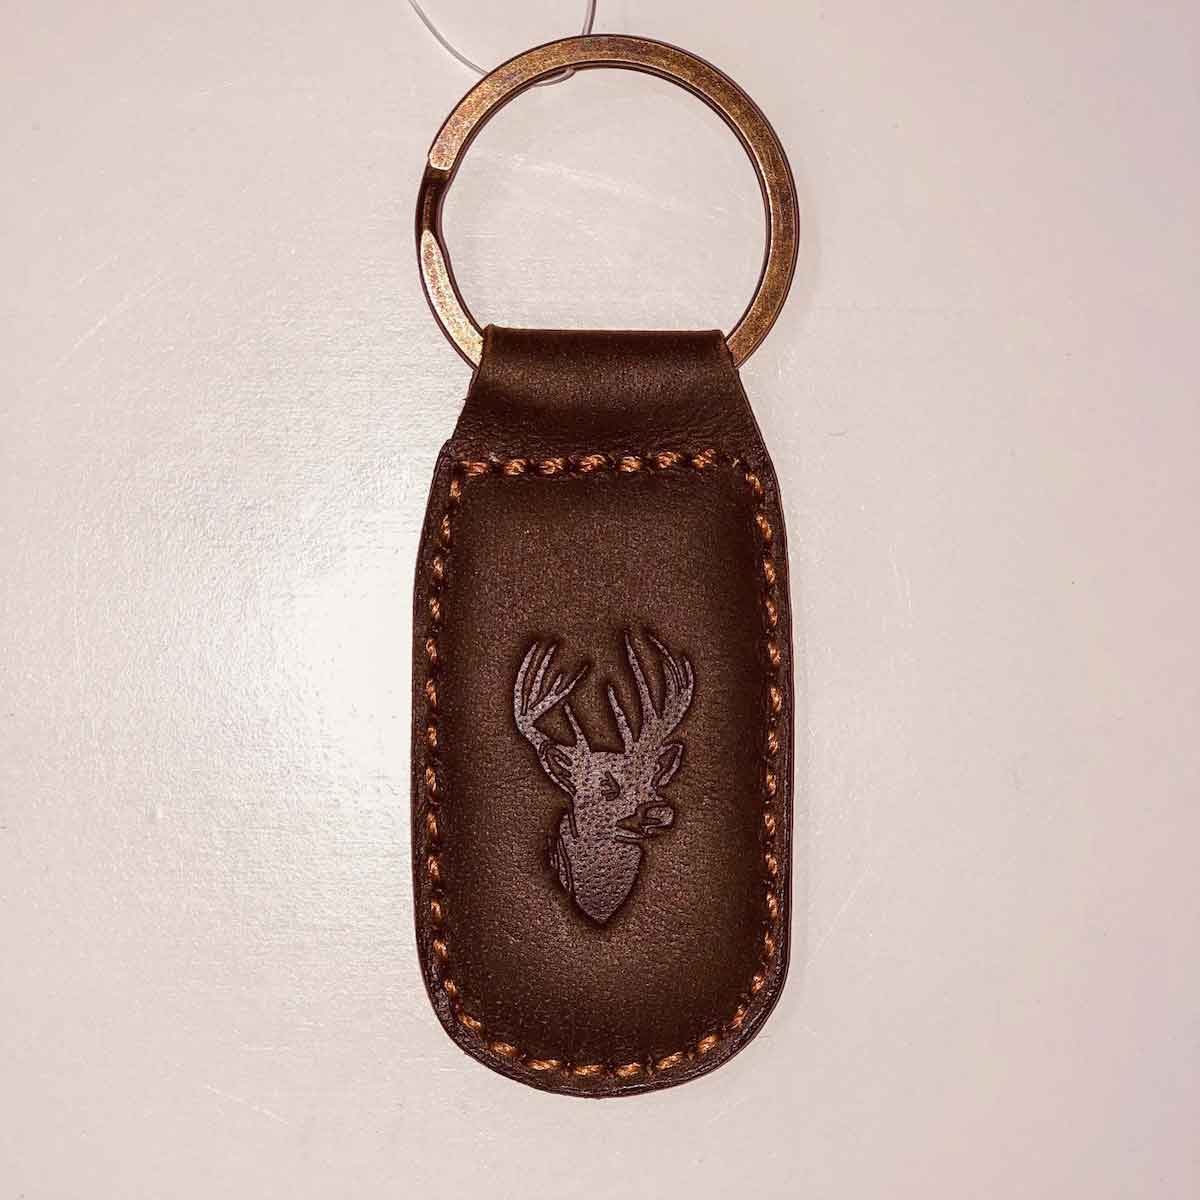 Bark and Willow Deluxe Leather Carabiner Keychain Medium Brown / Silver